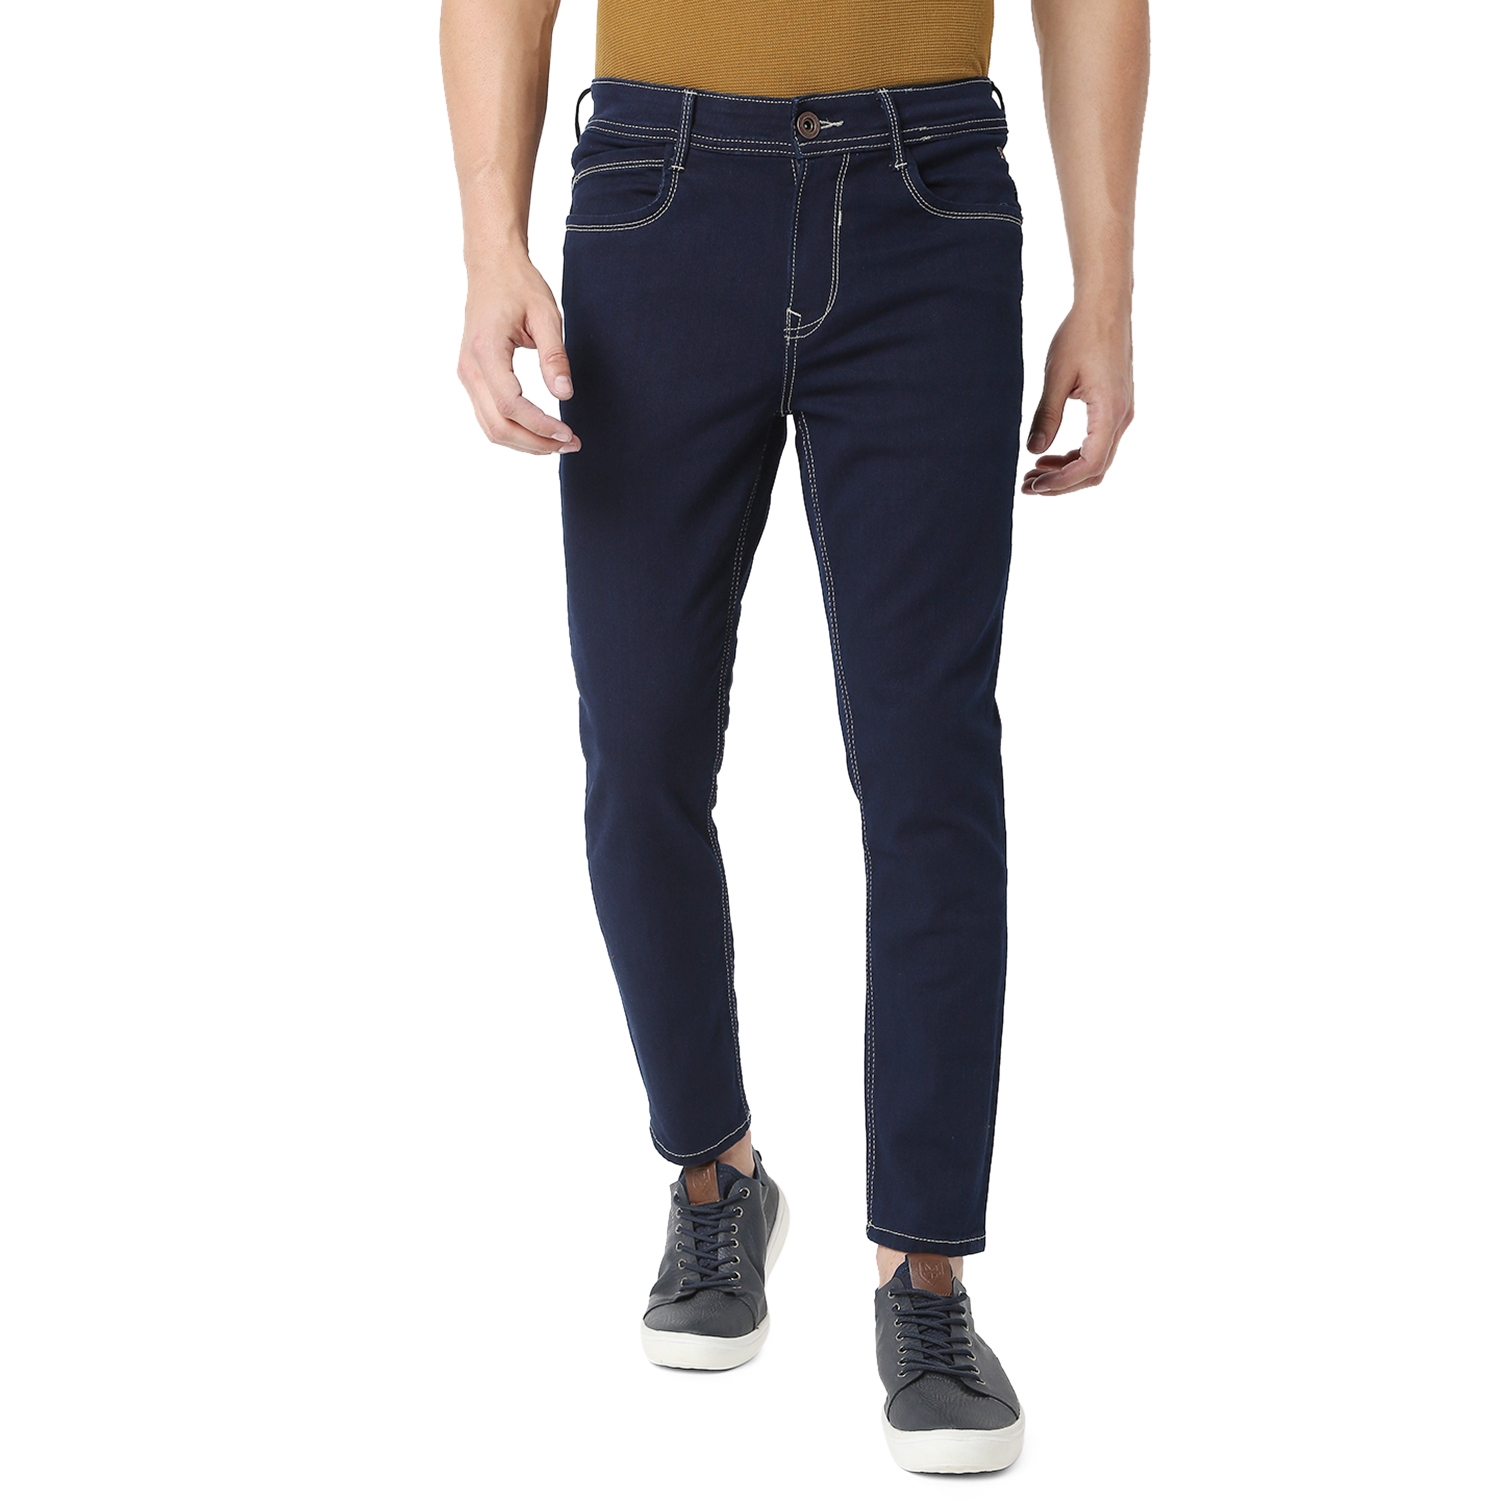 MUFTI | Mufti Mens Blue Ankle Length Slim Fit Jeans